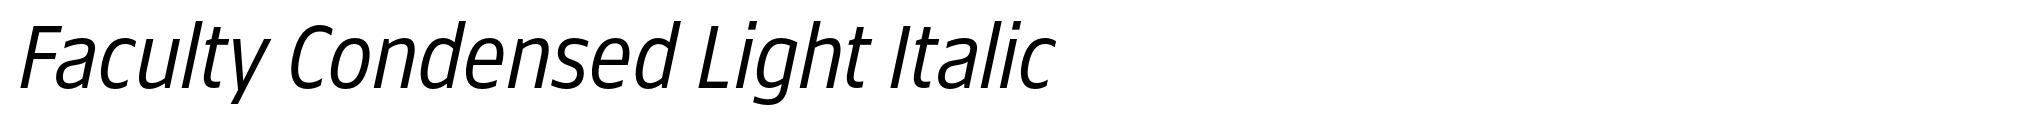 Faculty Condensed Light Italic image